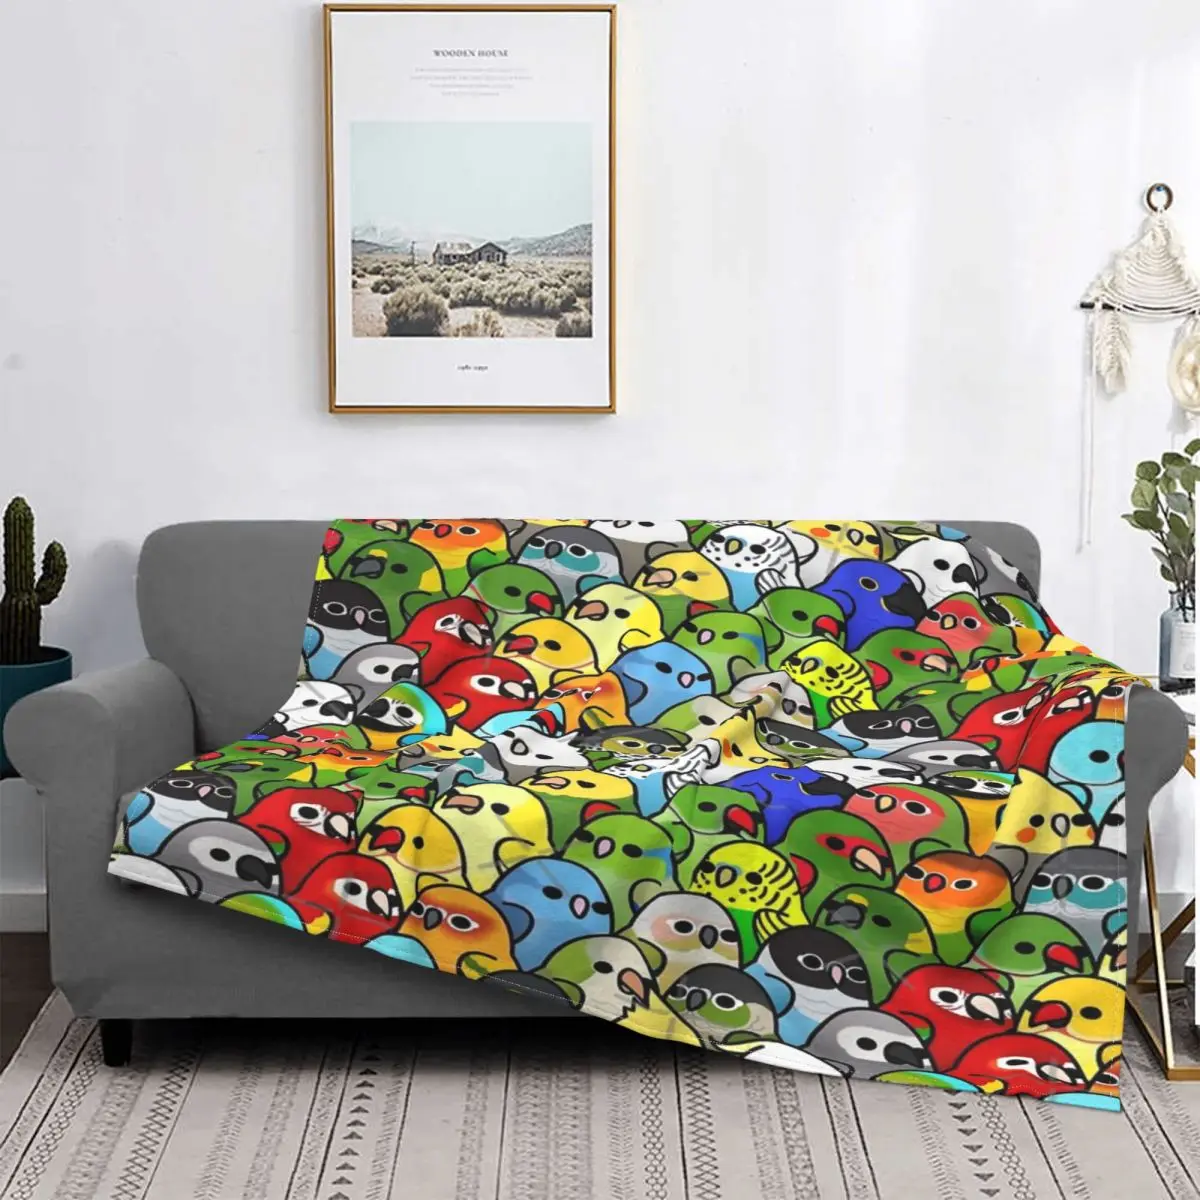 

Too Many Birds Bird Squad Classic Blanket Bedspread Bed Plaid Blankets Beach Cover Hooded Blanket Picnic Bedspread